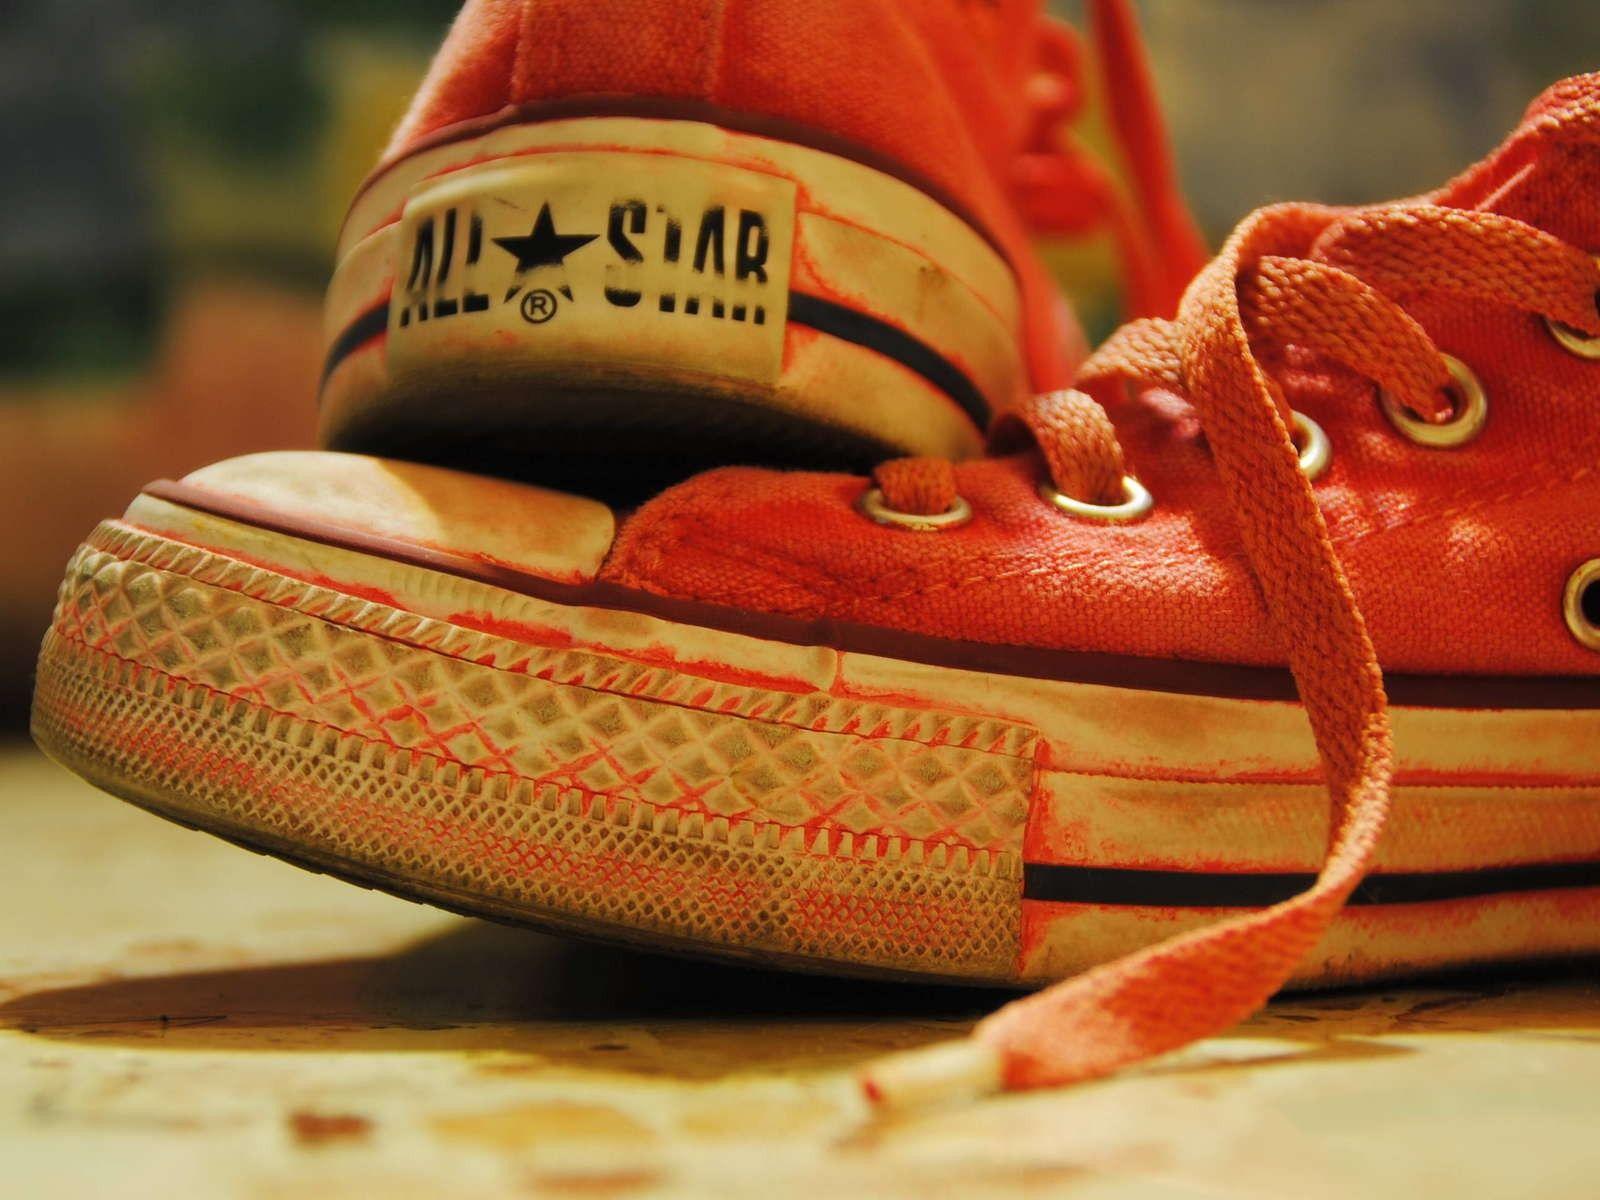 Red Converse All Star wallpaper. Red Converse All Star